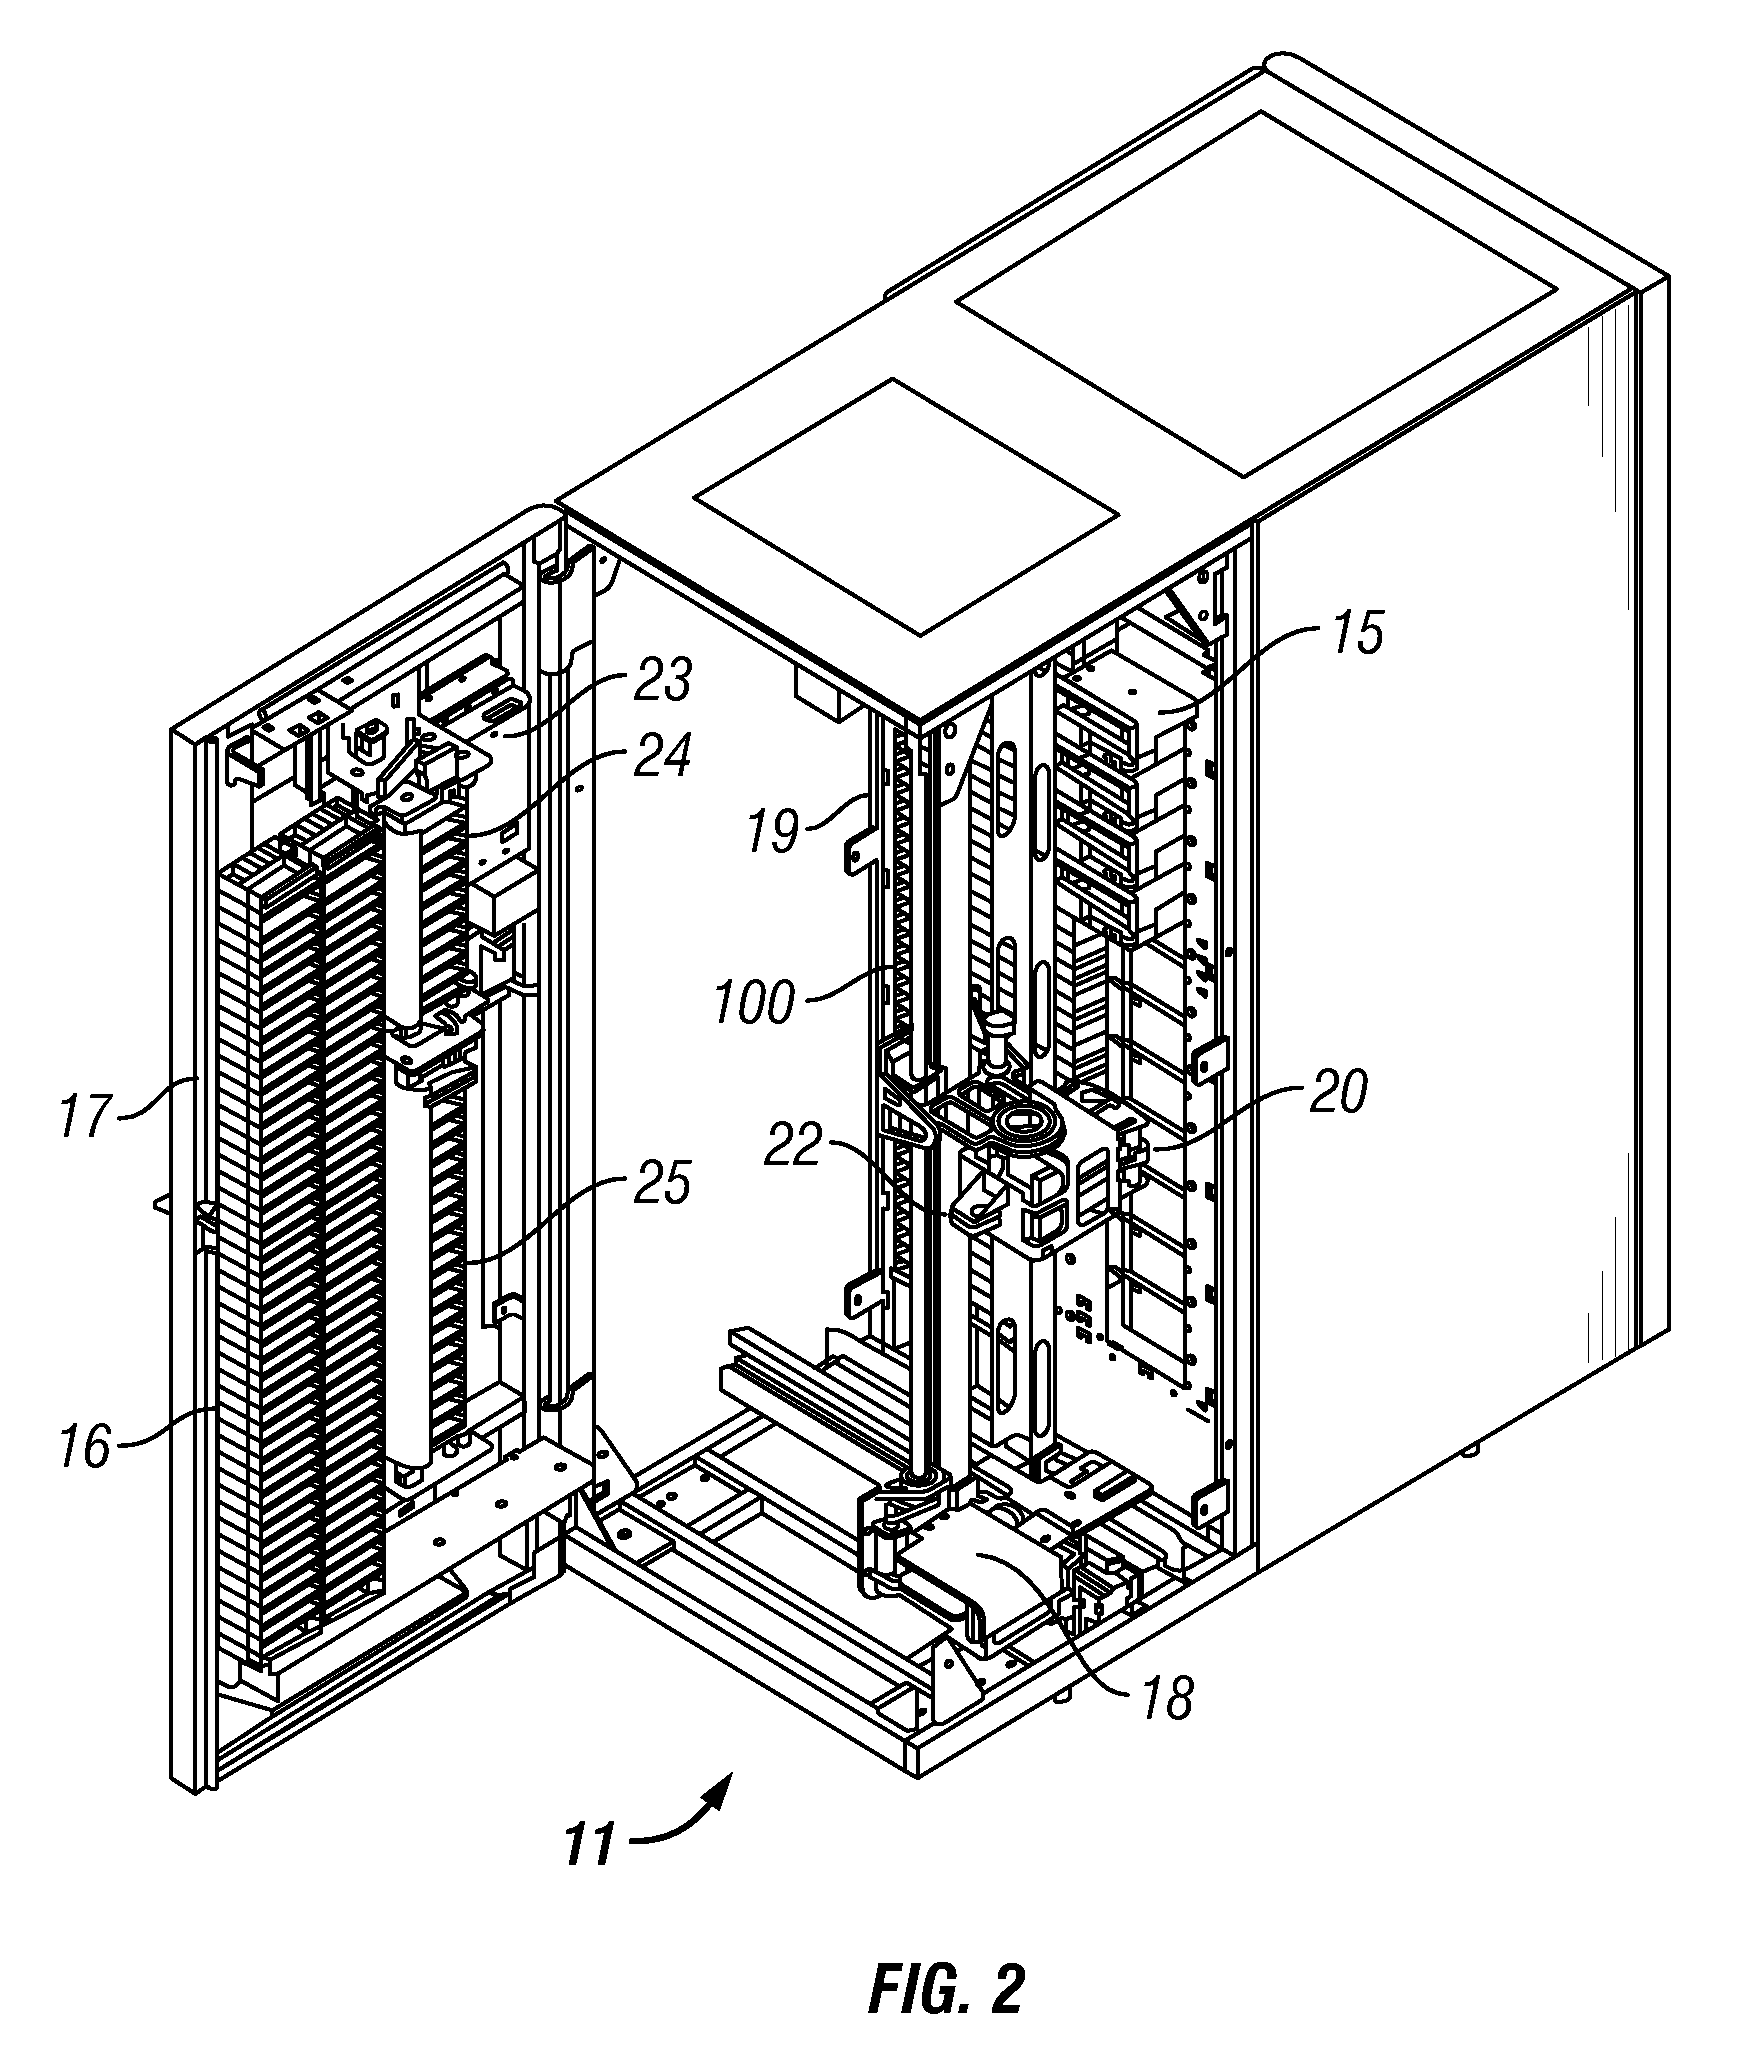 Depth spreading placement of data storage cartridges in multi-cartridge deep slot cells of an automated data storage library